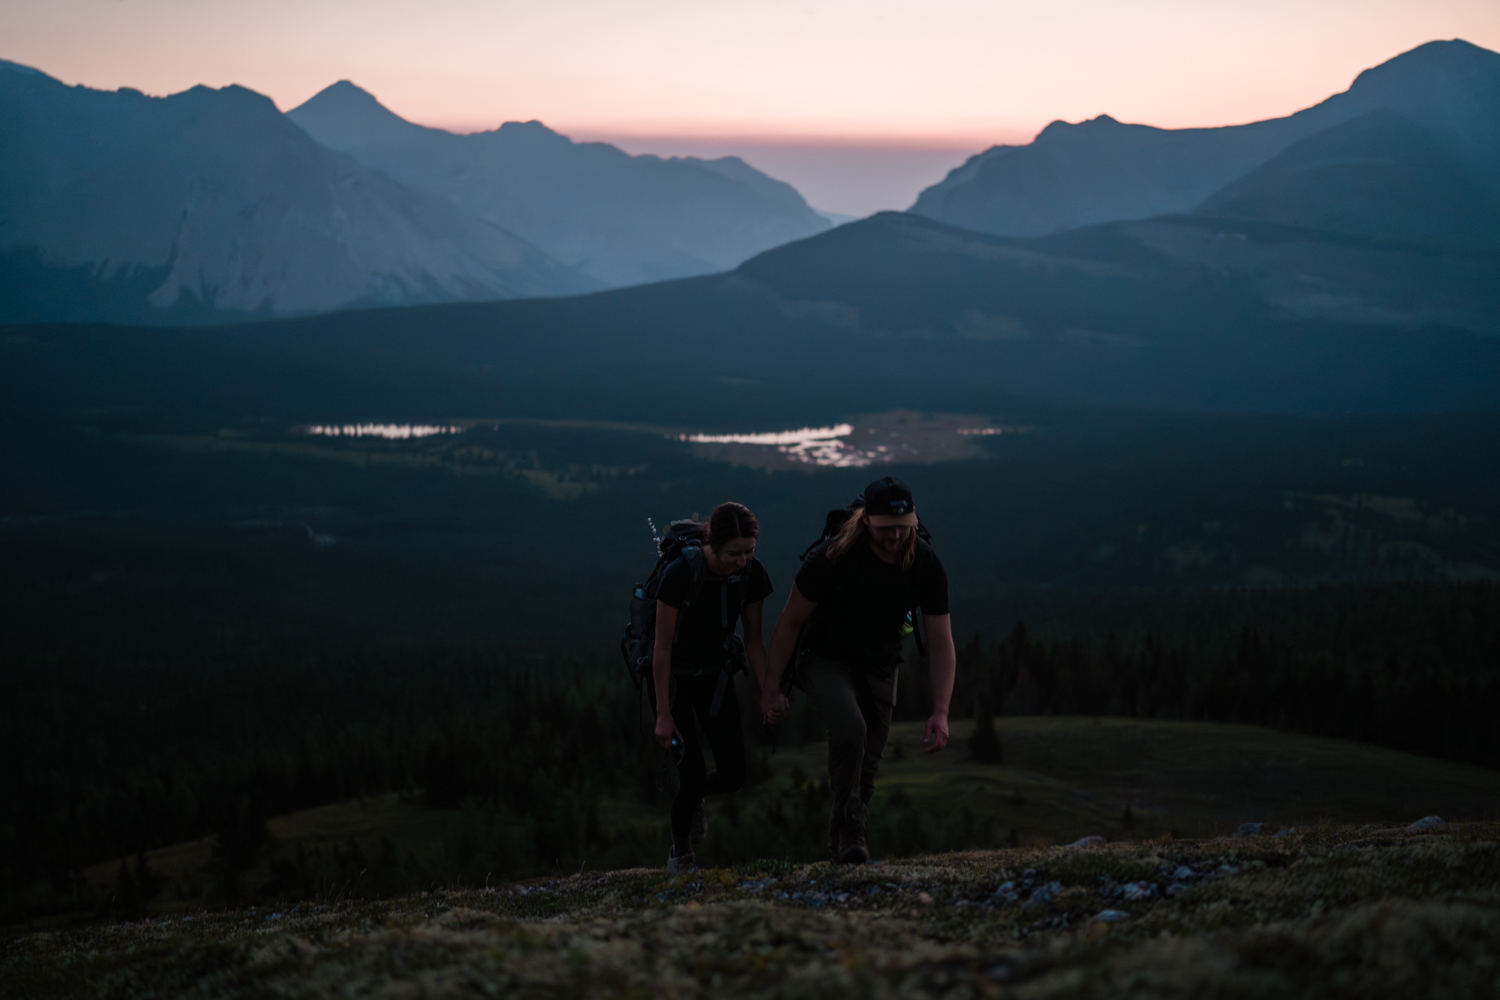 Couple hikes a mountain pre sunrise on their backcountry camping elopement.